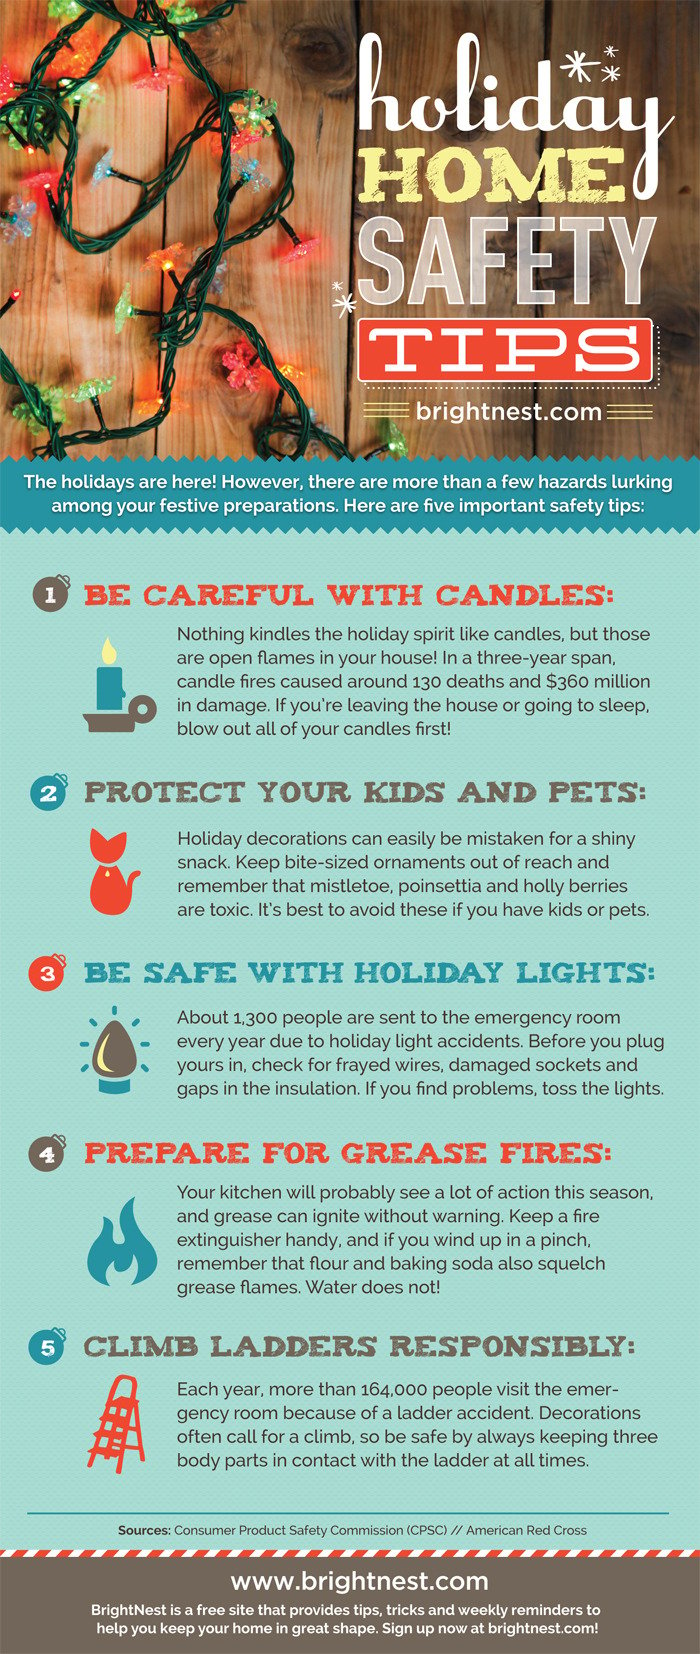 Holiday Home Safety Tips 